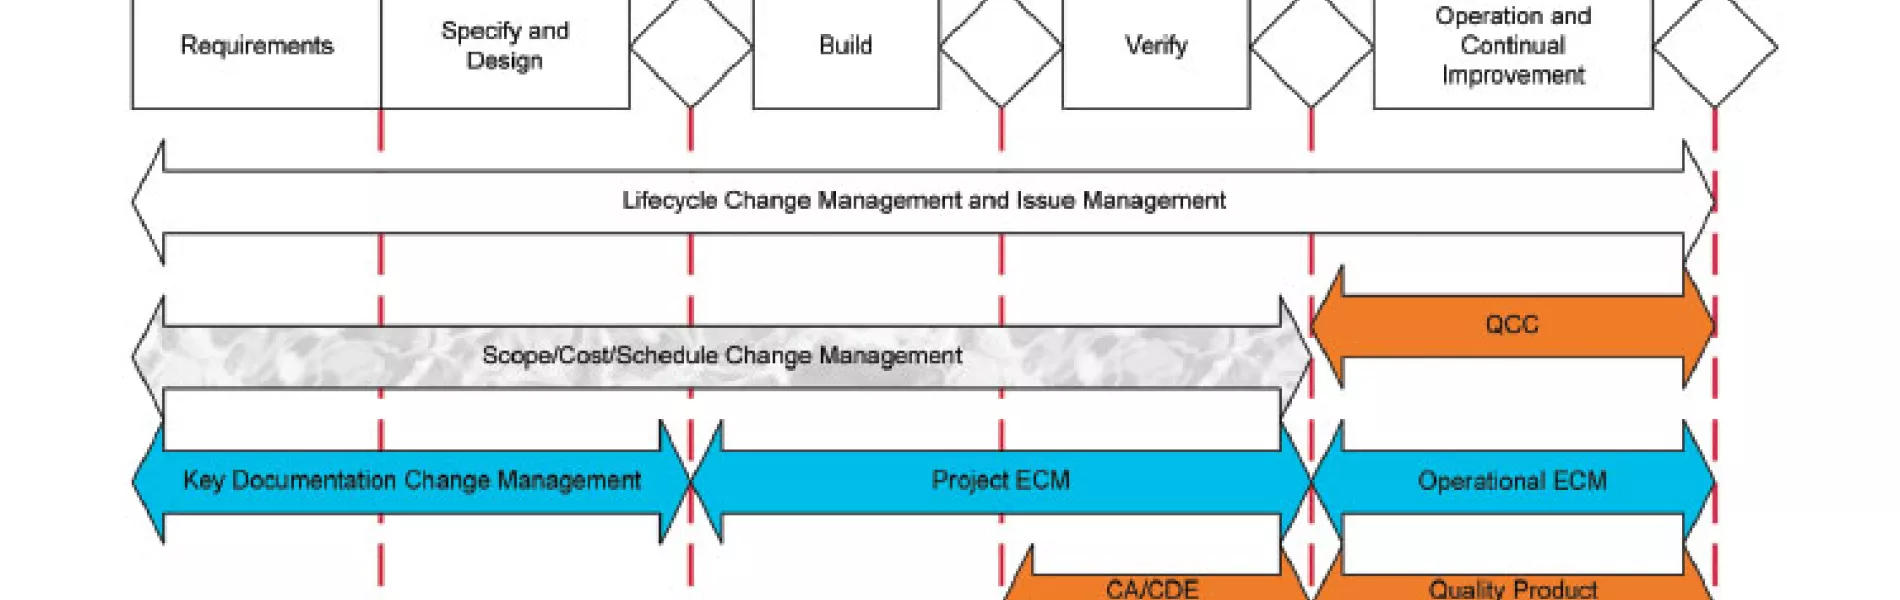 Figure 1: Overview of life-cycle change management and issue management processes.